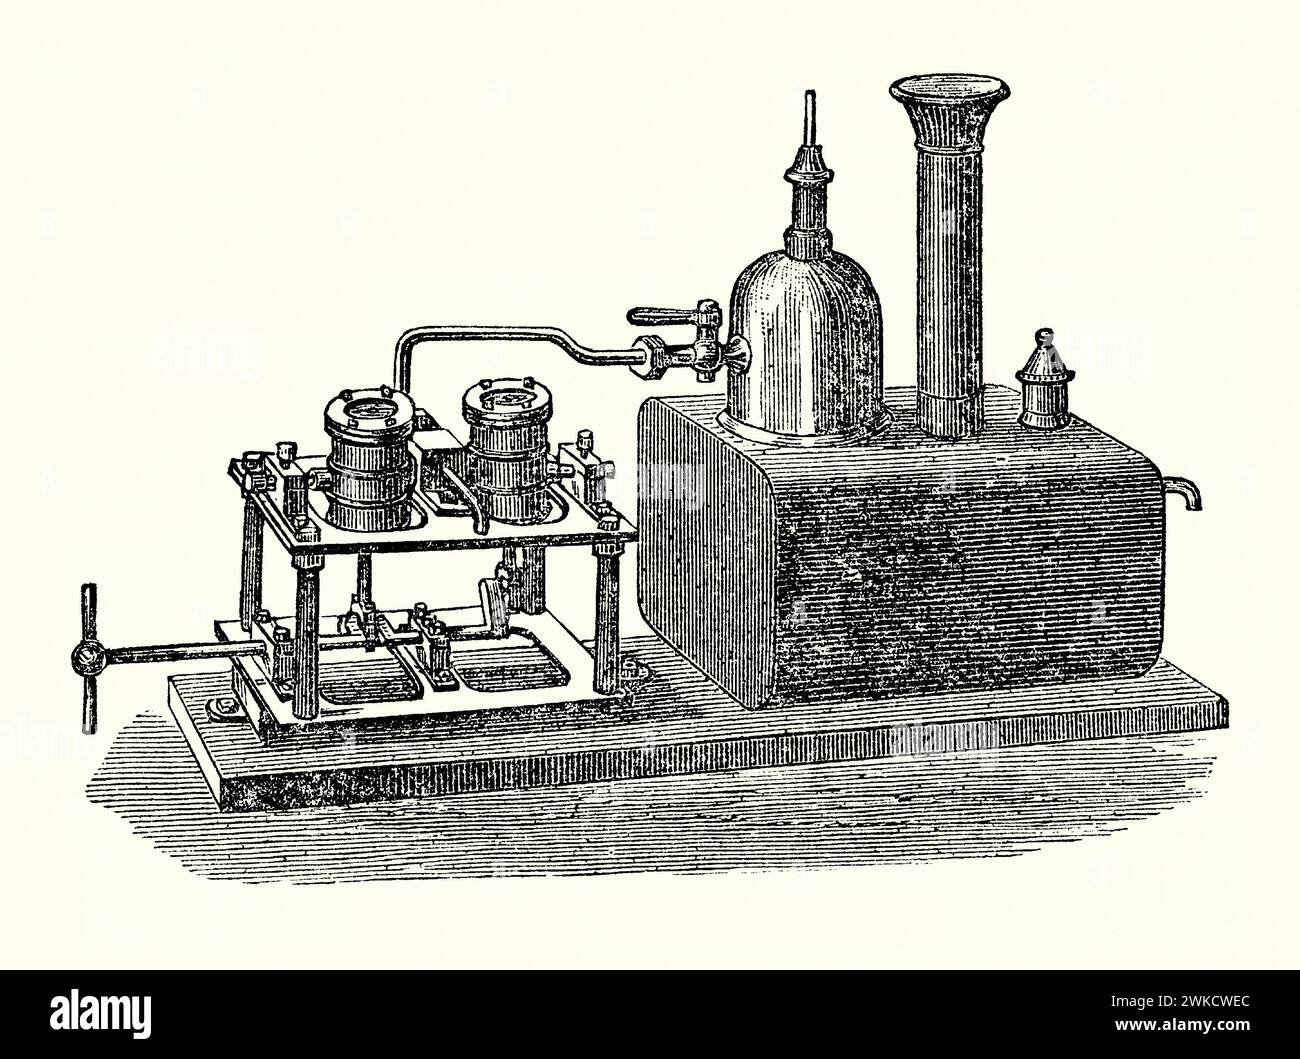 An old engraving of a marine screw engine that could be used in a model boat the 1800s. It is from Victorian book of the 1890s on sports, games and pastimes. This engine has two cylinders (left), connected to the screw shaft below. The boiler (right) would have been heated from below by a small oil lamp to create the steam power. Today compressed gas, such as butane, is often used for model steam boats. Stock Photo